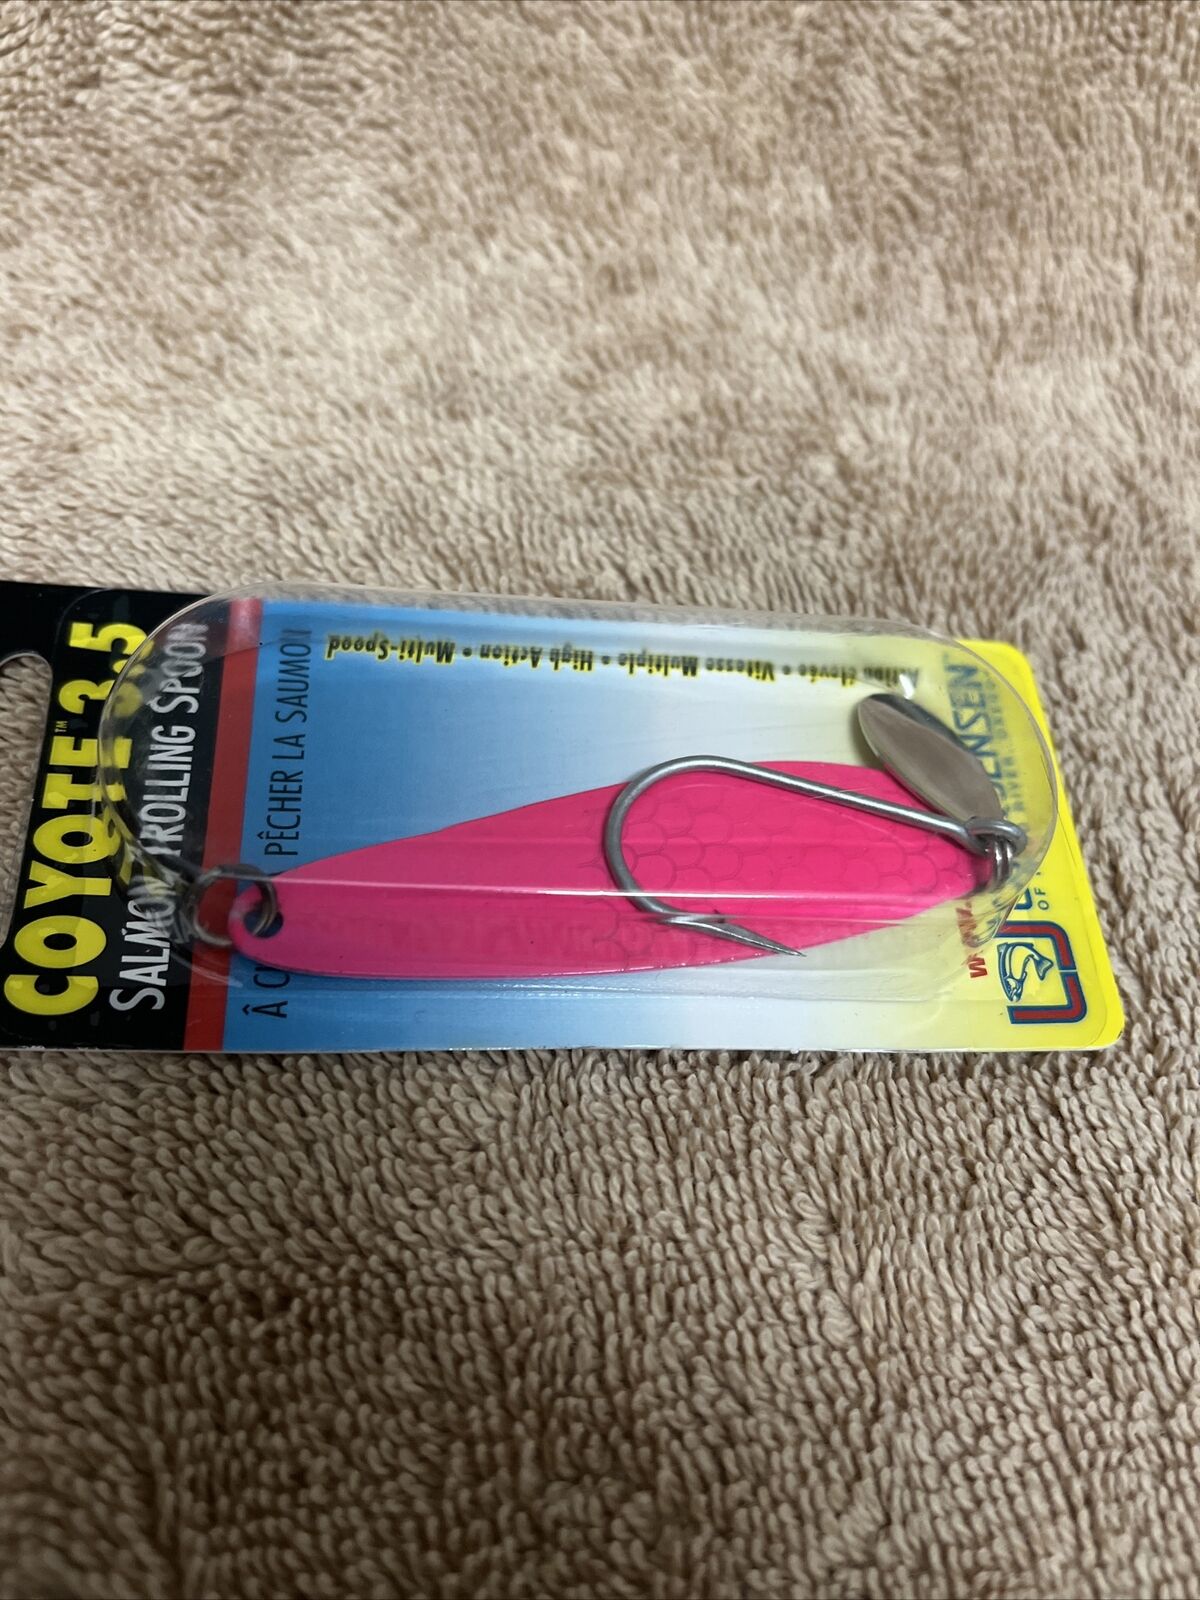 Lot Of 3-Luhr Jensen Salmon Trolling Spoons, Coyote3.5, Pink, Humpy Special